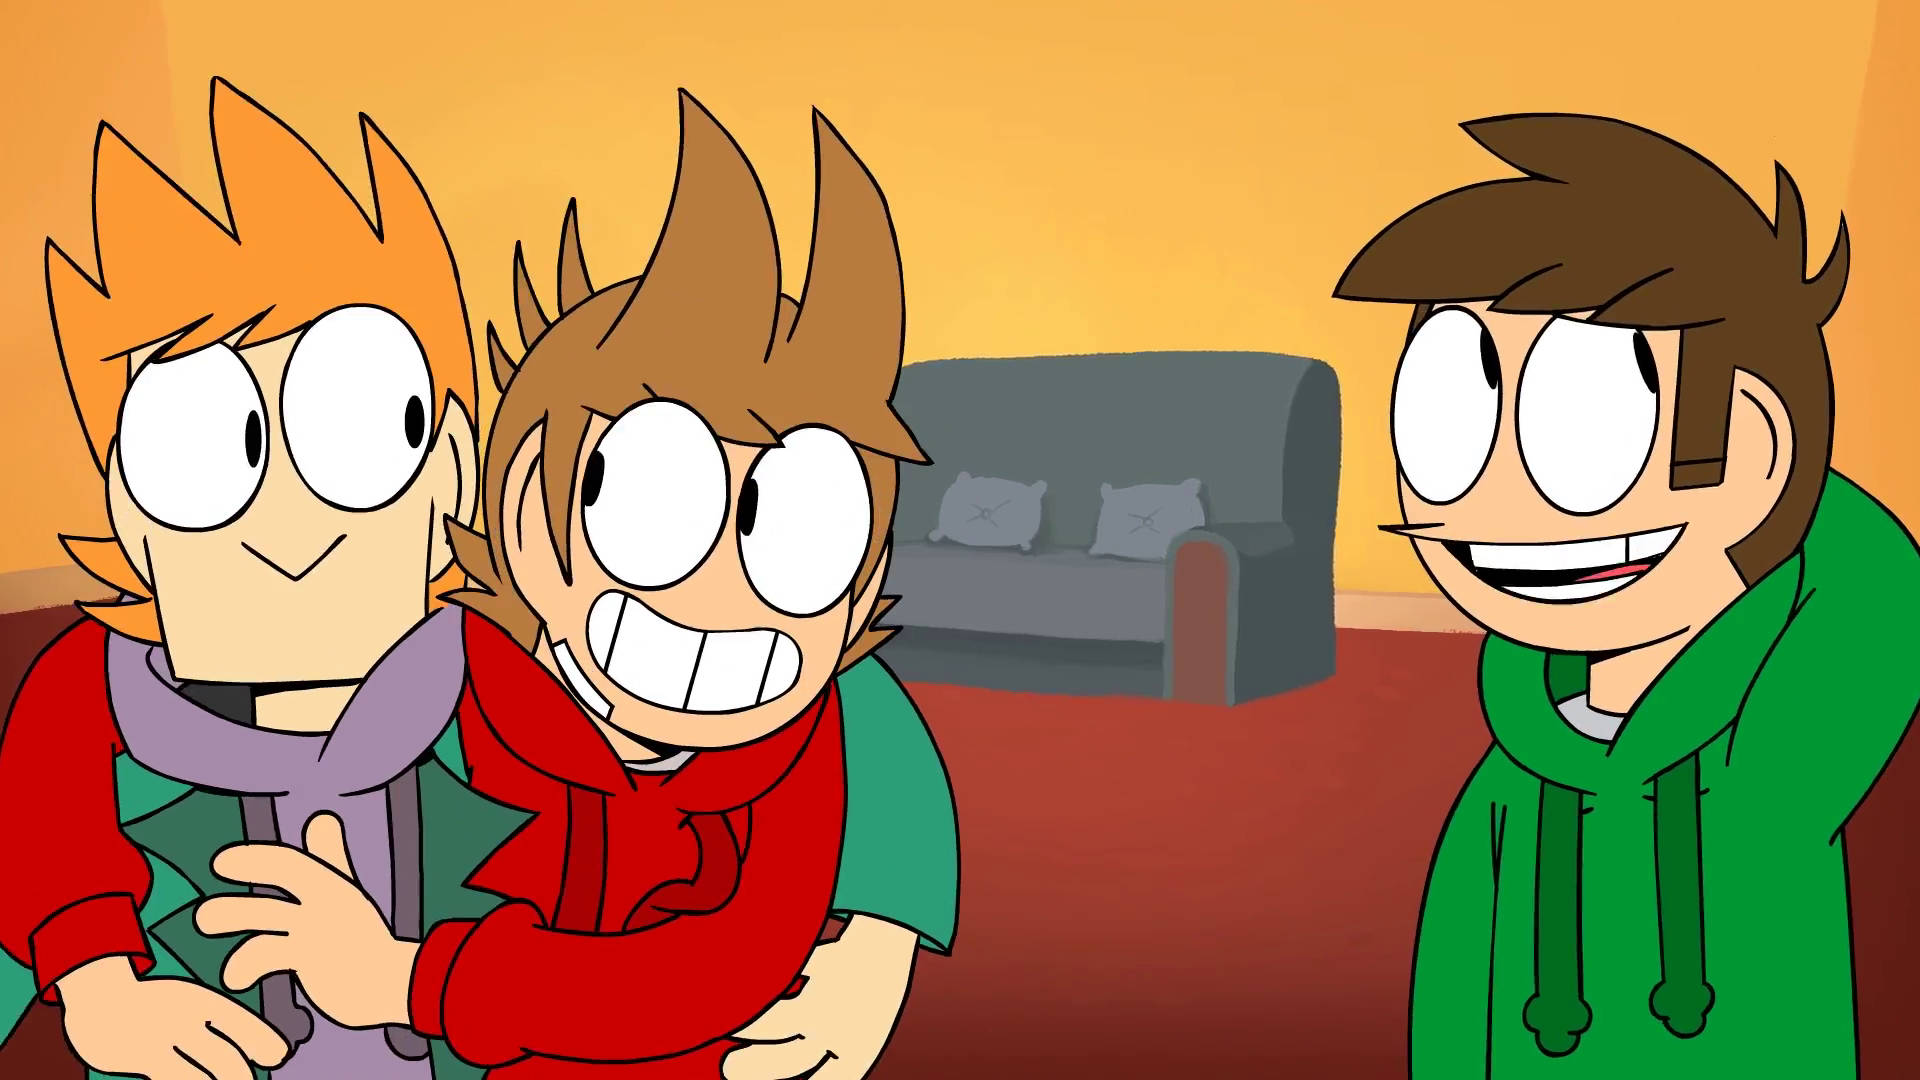 Eddsworld Protagonists Catching Up